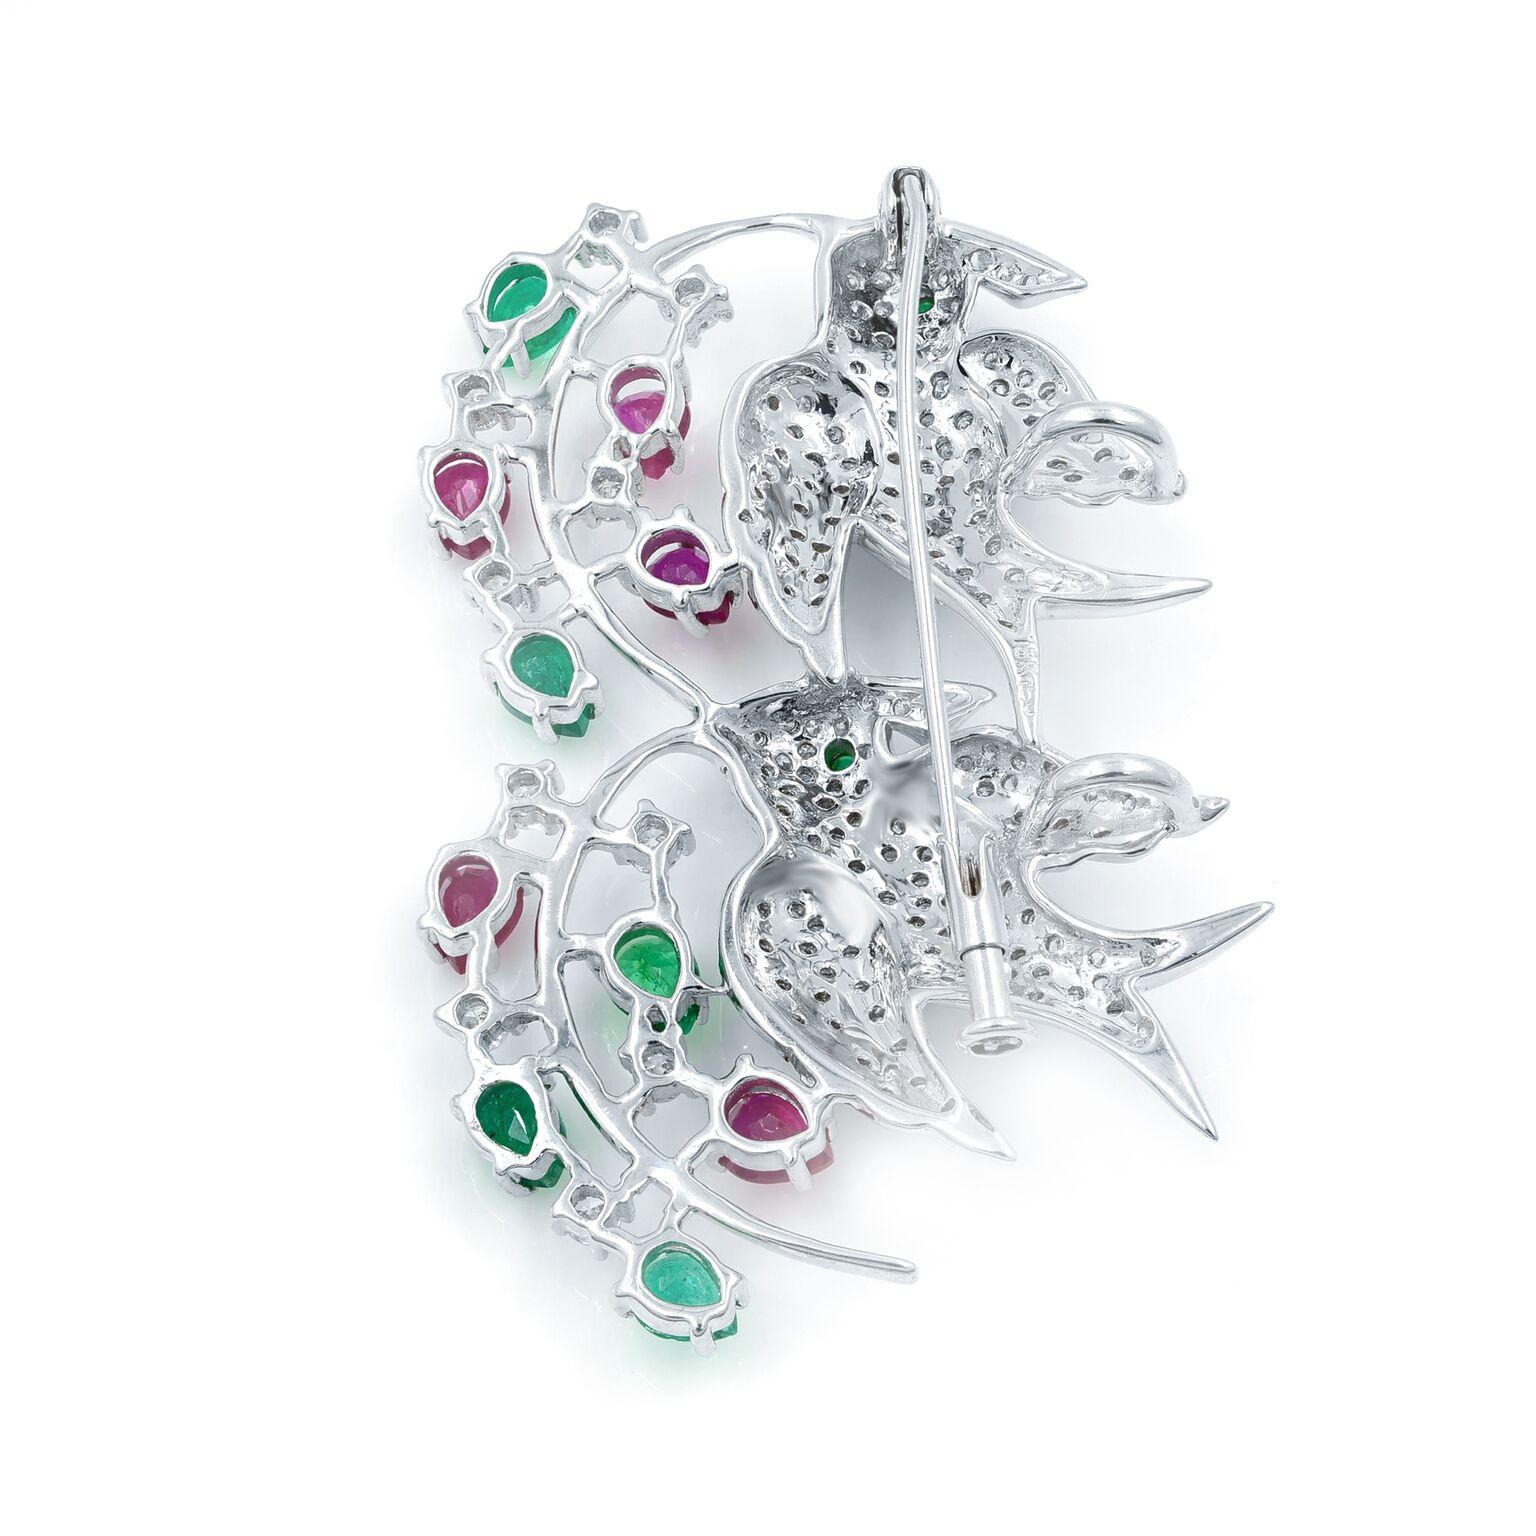 This stunning openwork, 18k white gold brooch is set with glittering diamonds, vibrant emeralds and rubies. This brooch measures 2 1/4 inches tall by 1 7/8 inches wide. The Gemstones are described as follows: 7 Mixed Cut Emeralds weighing 1.56